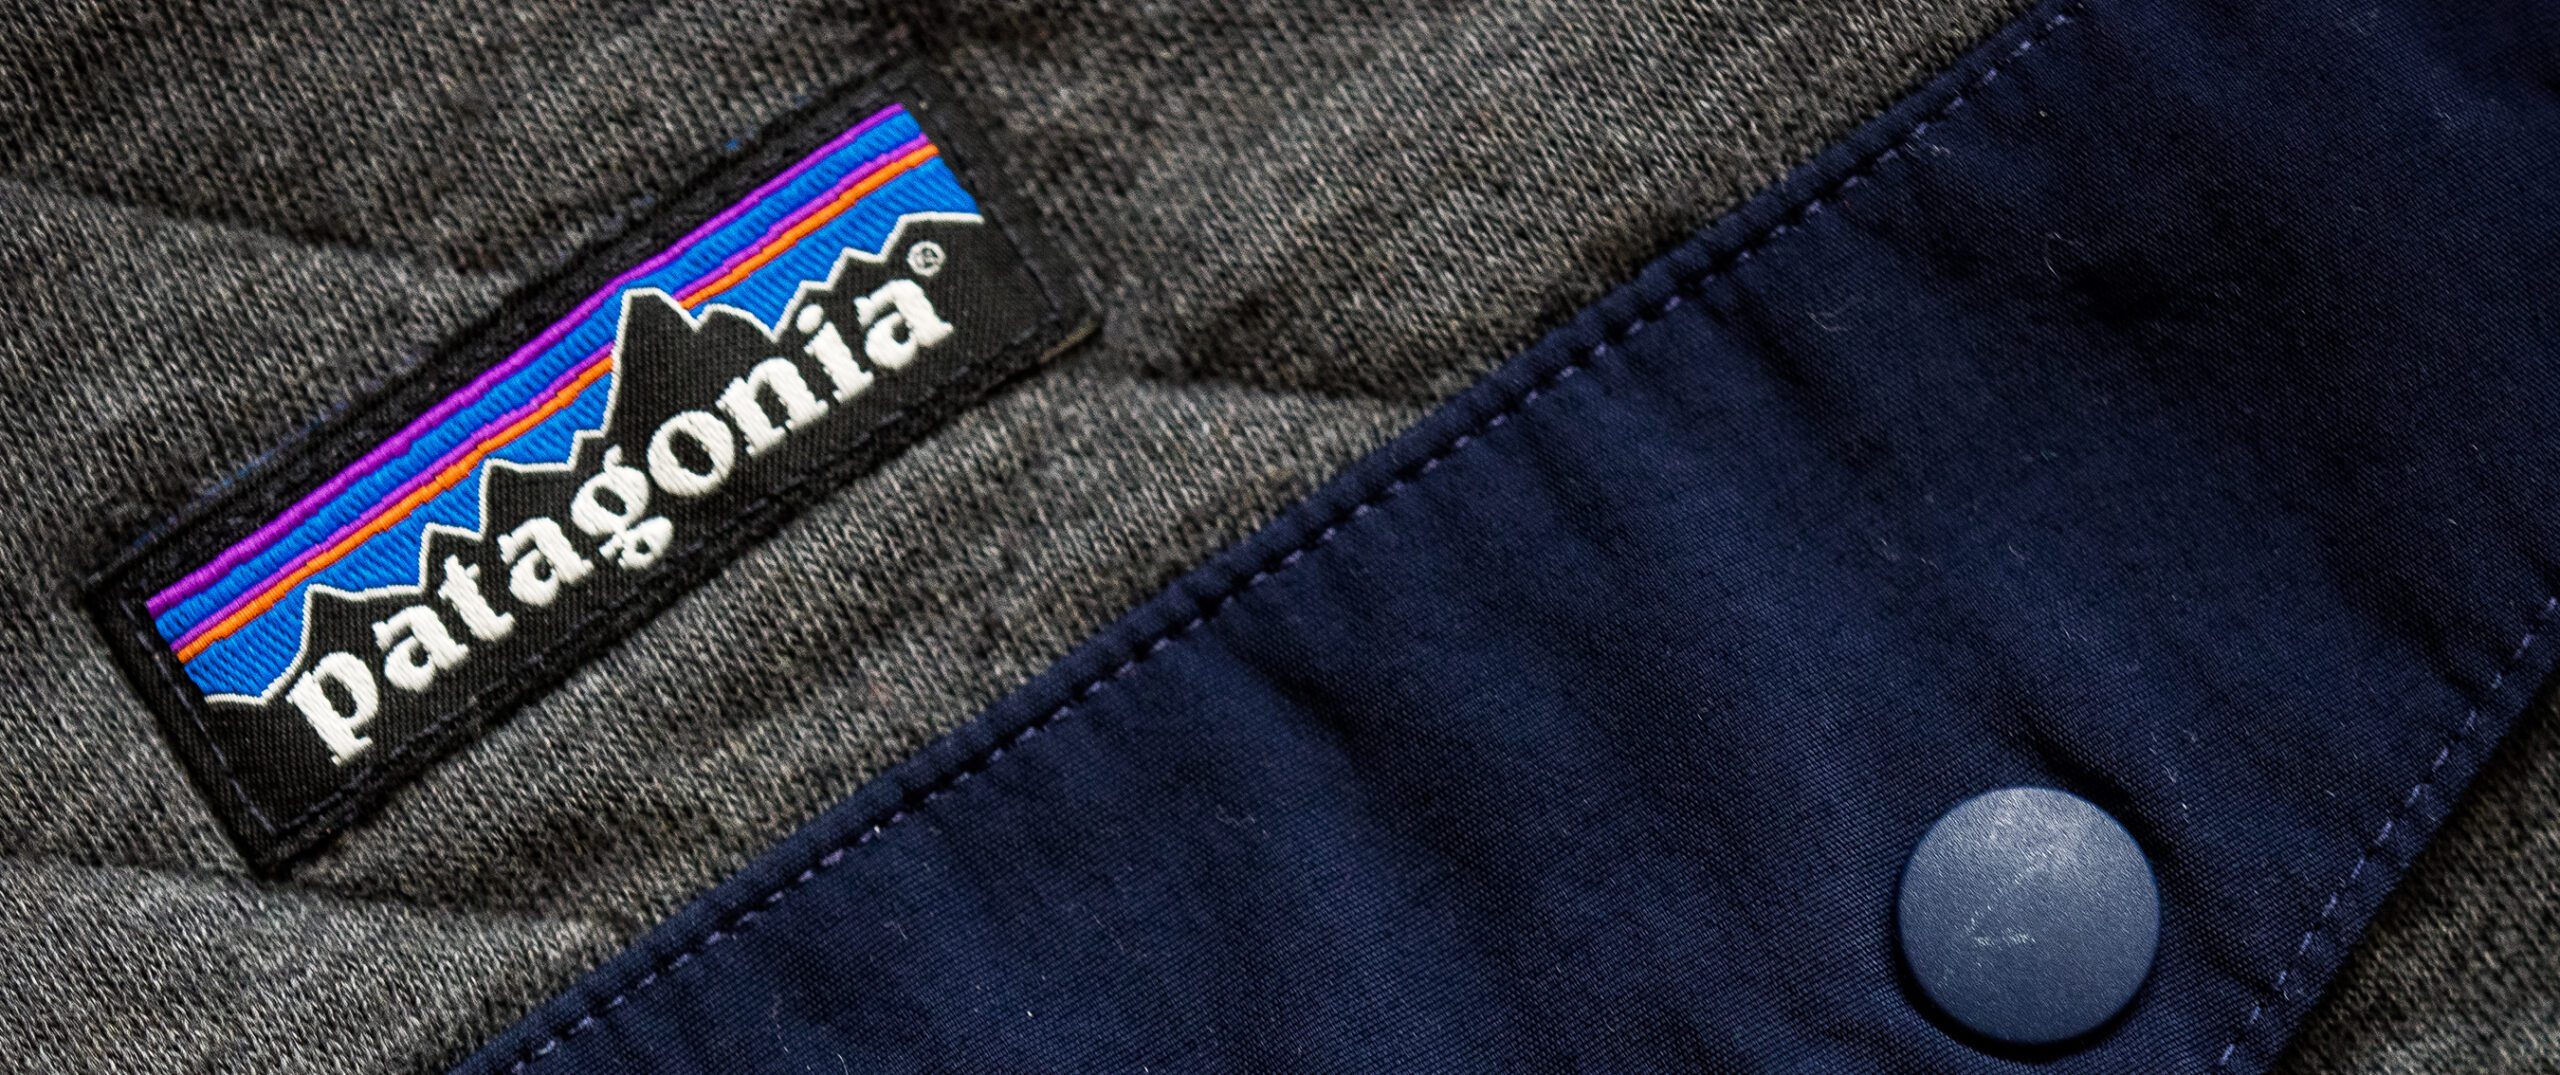 9 Outdoor Clothing Brands You'll Like As Much As Patagonia